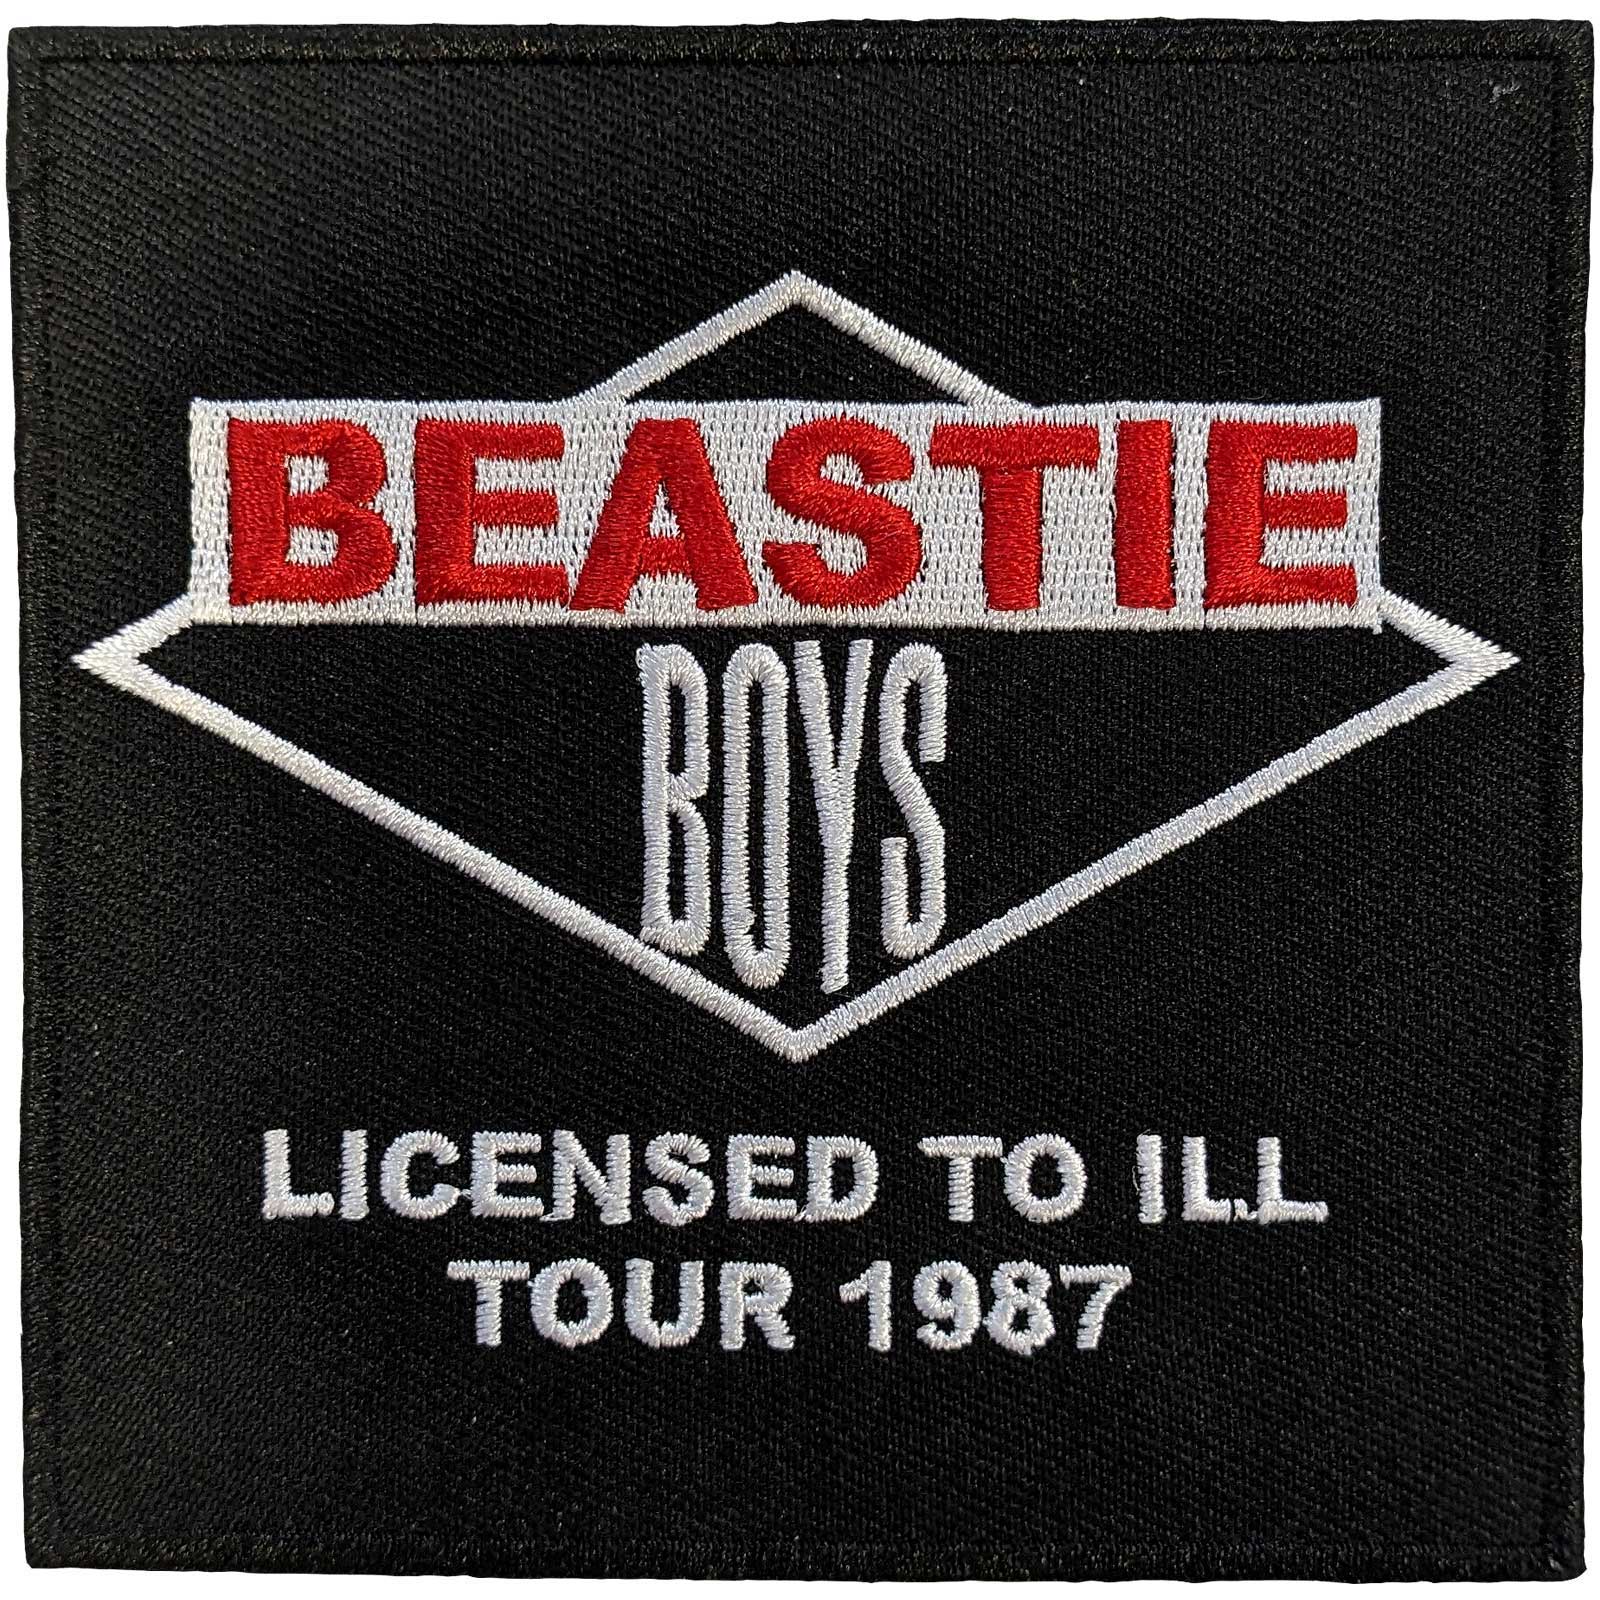 The Beastie Boys Standard Patch: Licensed To Ill Tour 1987